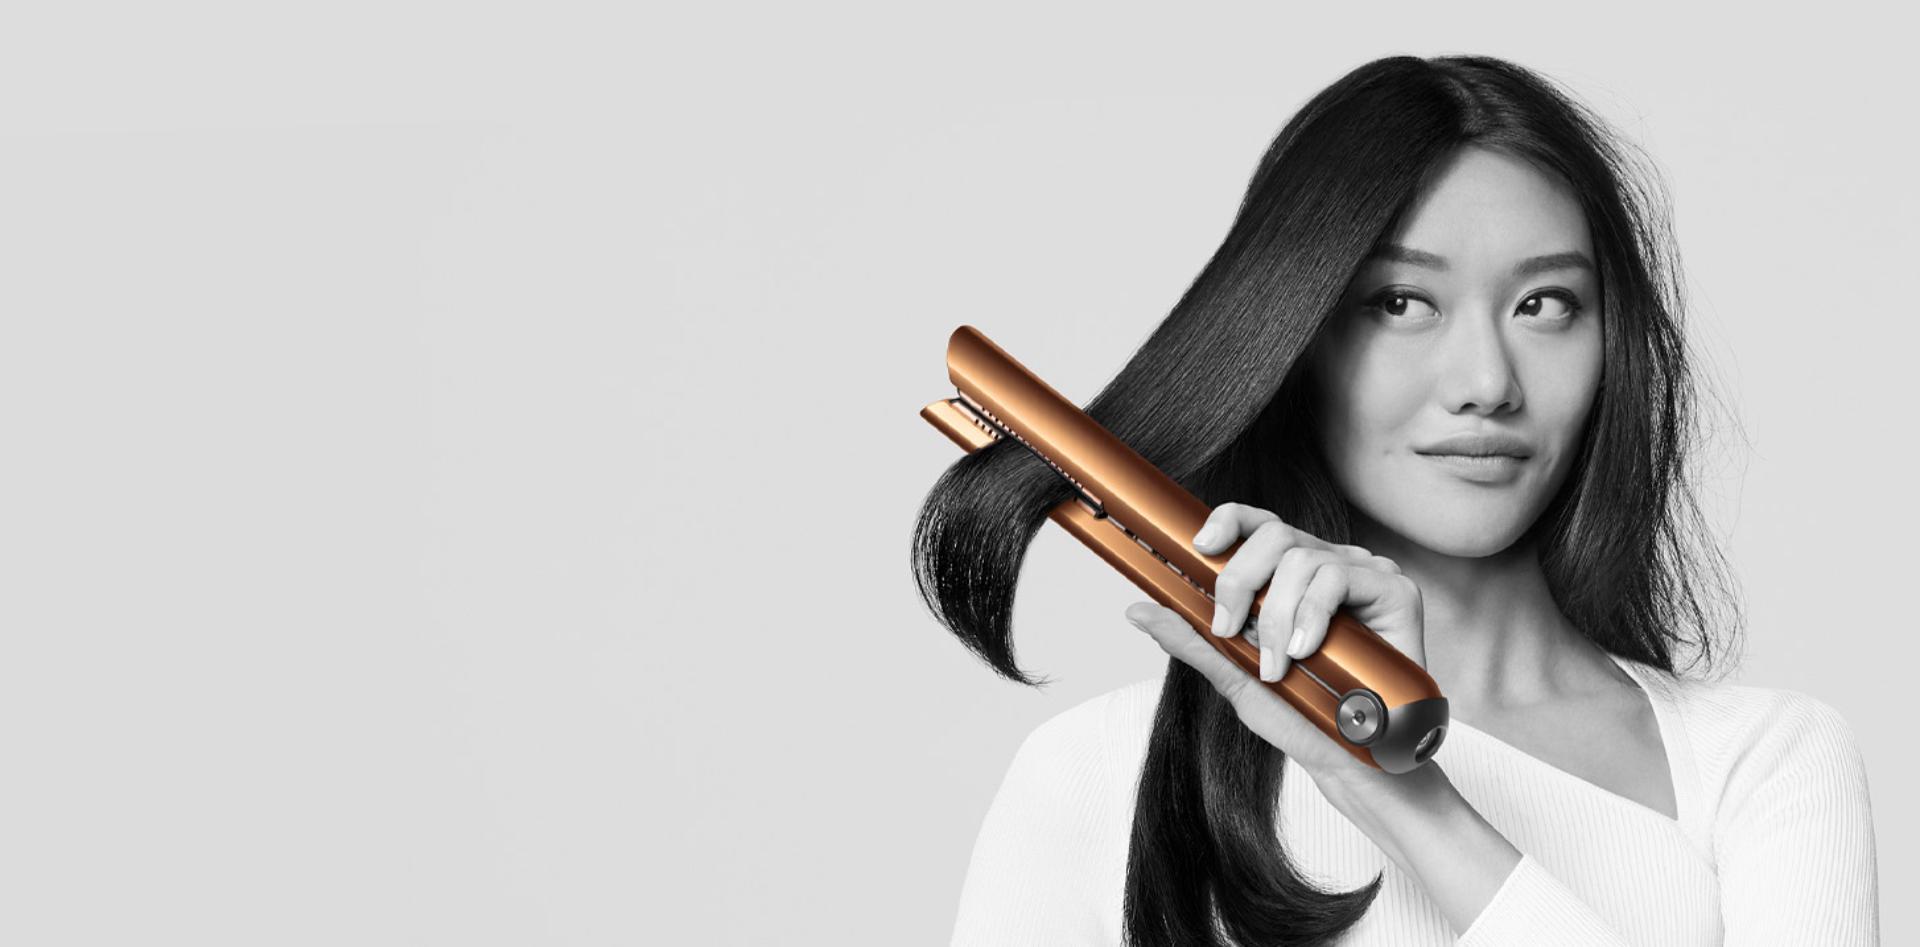 Model uses the Dyson Corrale straightener to style her hair